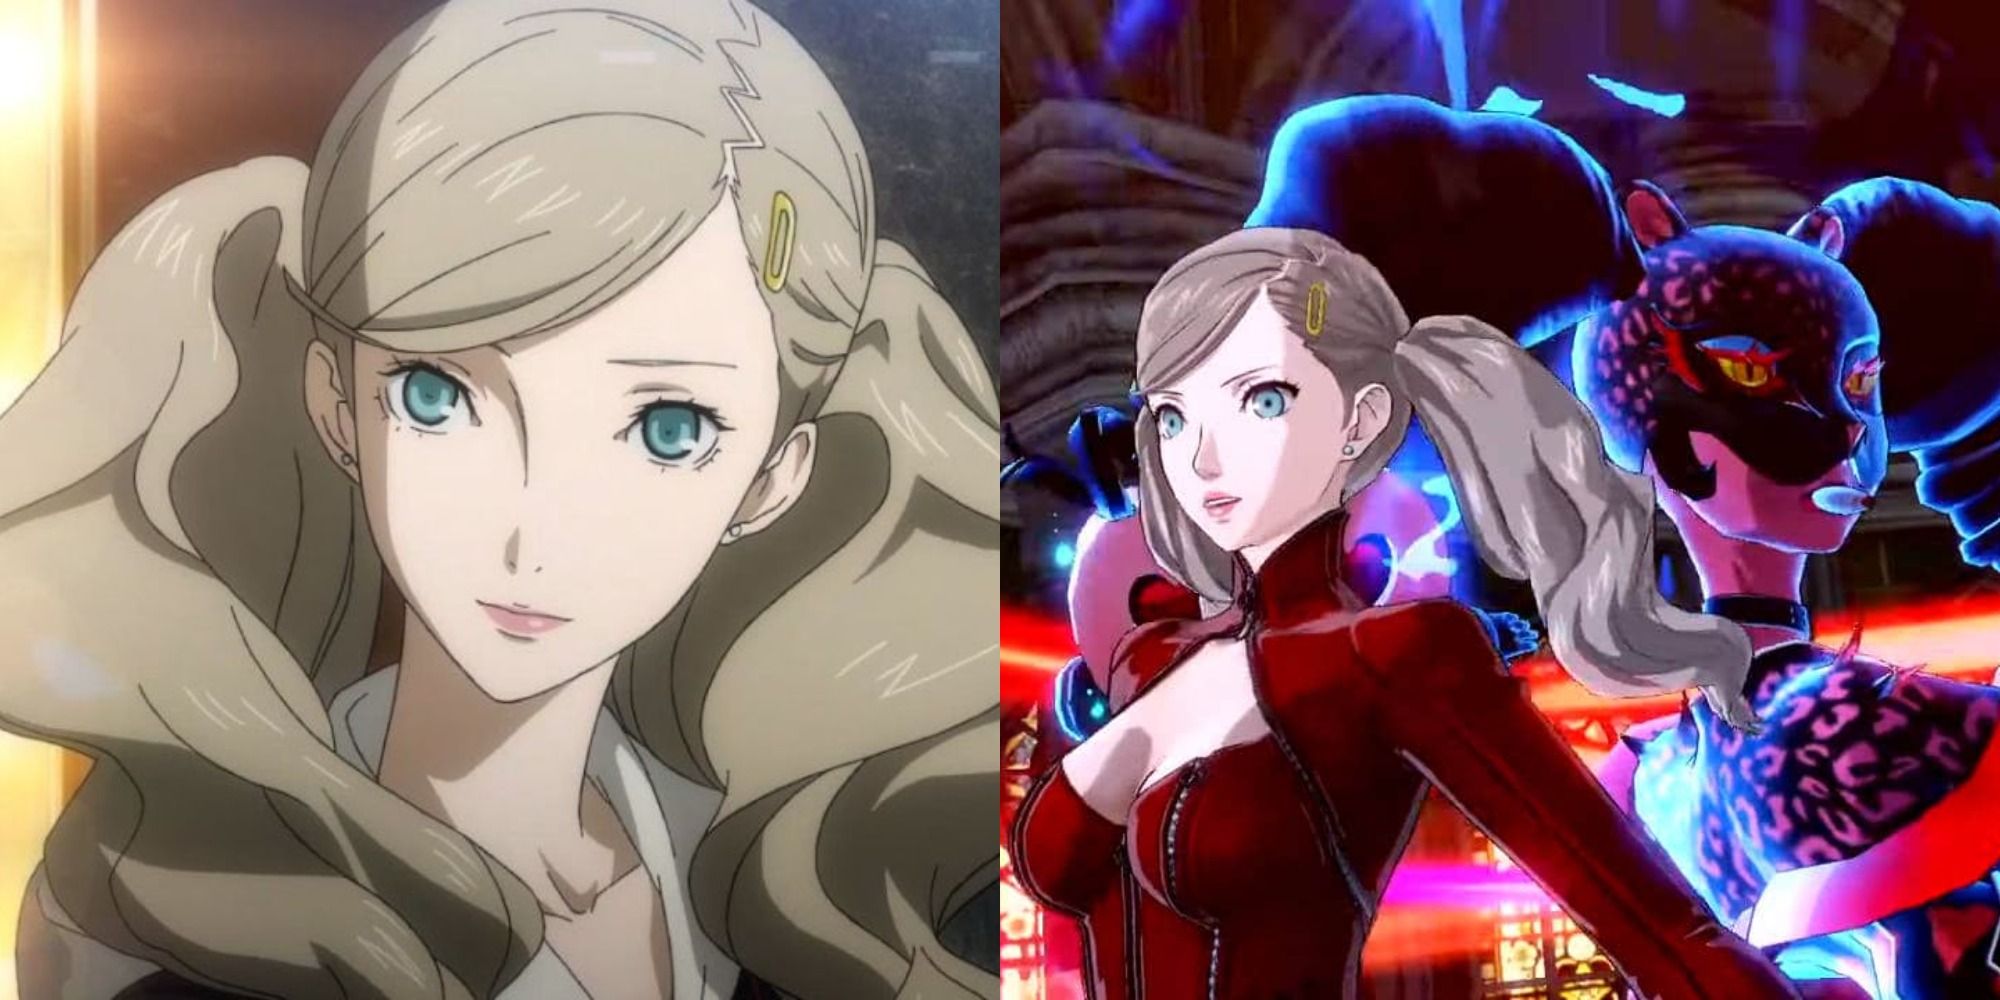 Split image of Ann from Persona 5 at different stages in the game